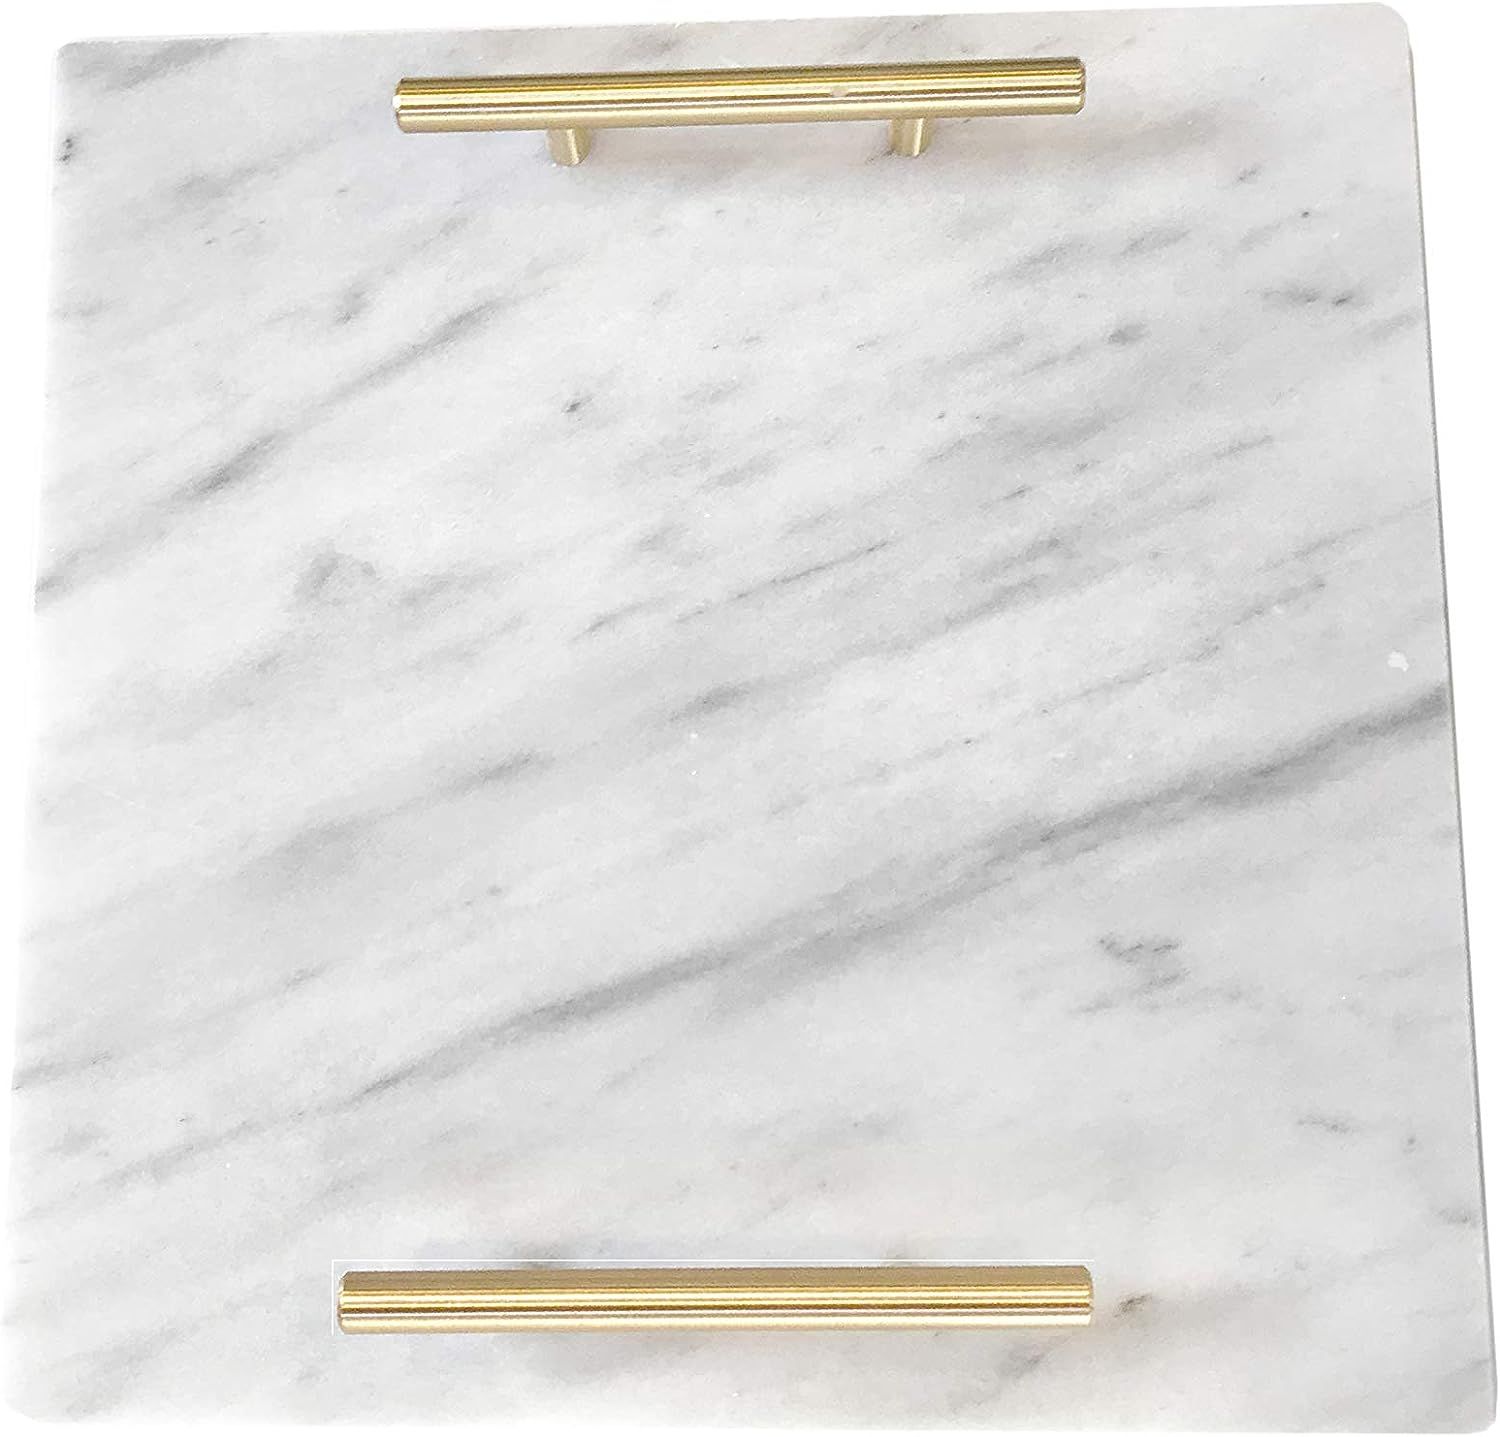 Cararra Blanco White Marble Slab Cheese Board with Gold Brushed Metal Handles | Amazon (US)